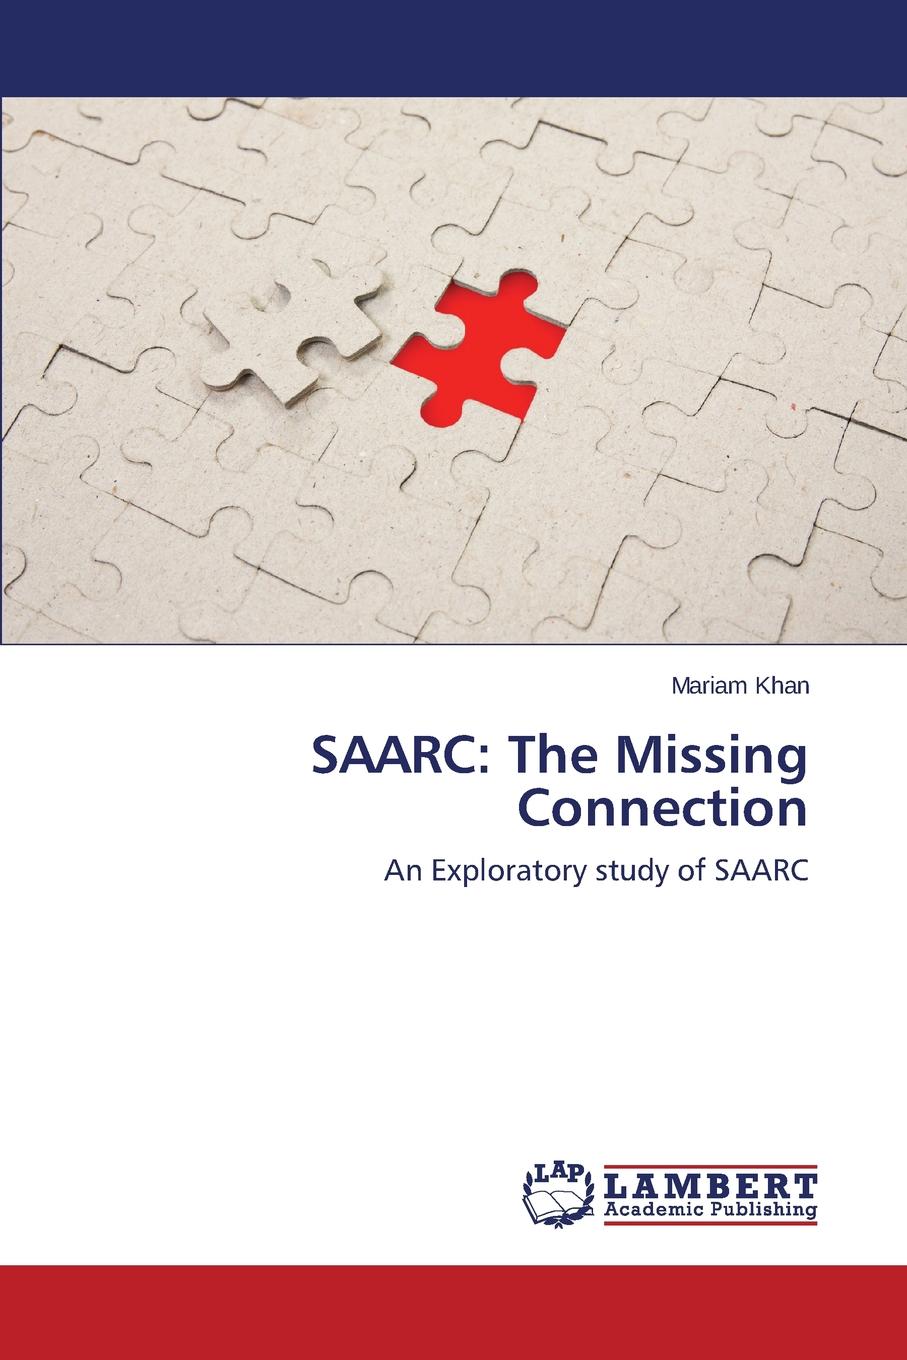 SAARC. The Missing Connection